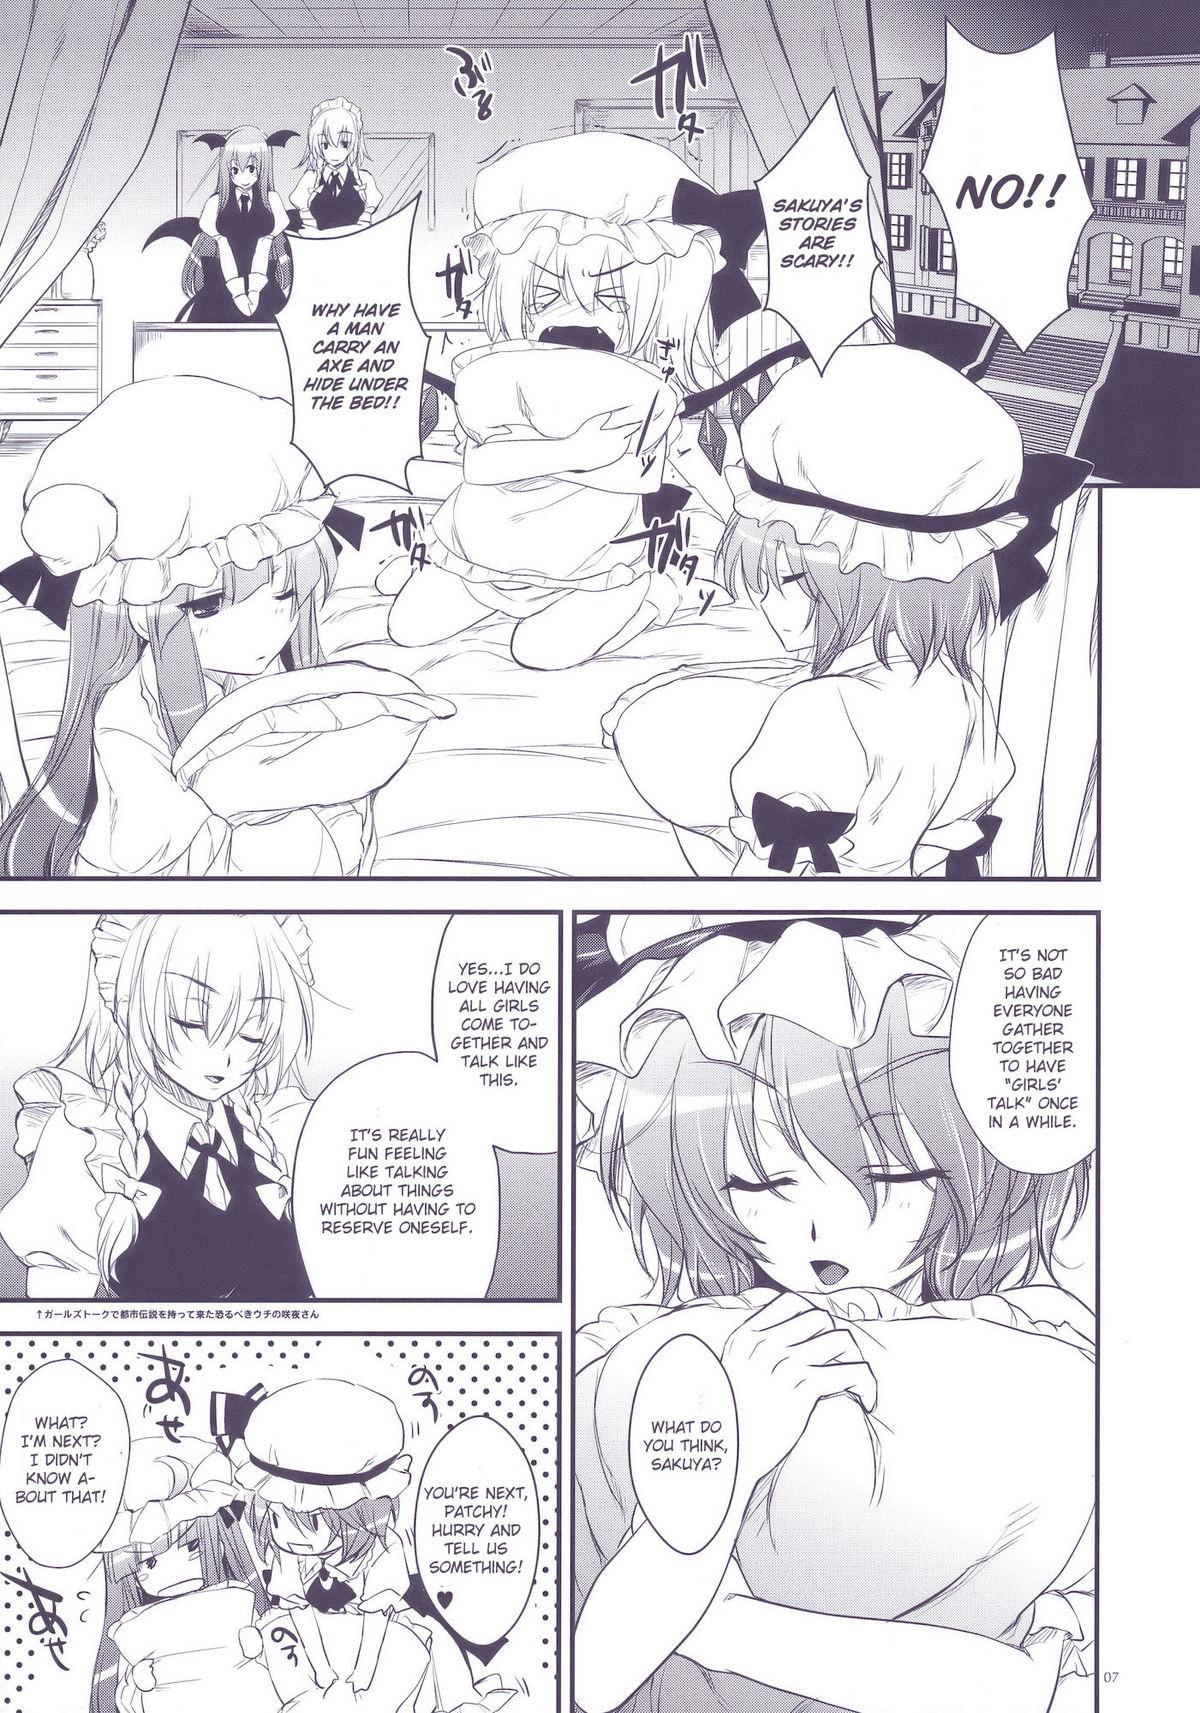 Negra GariGari 22 - Touhou project Submission - Page 7